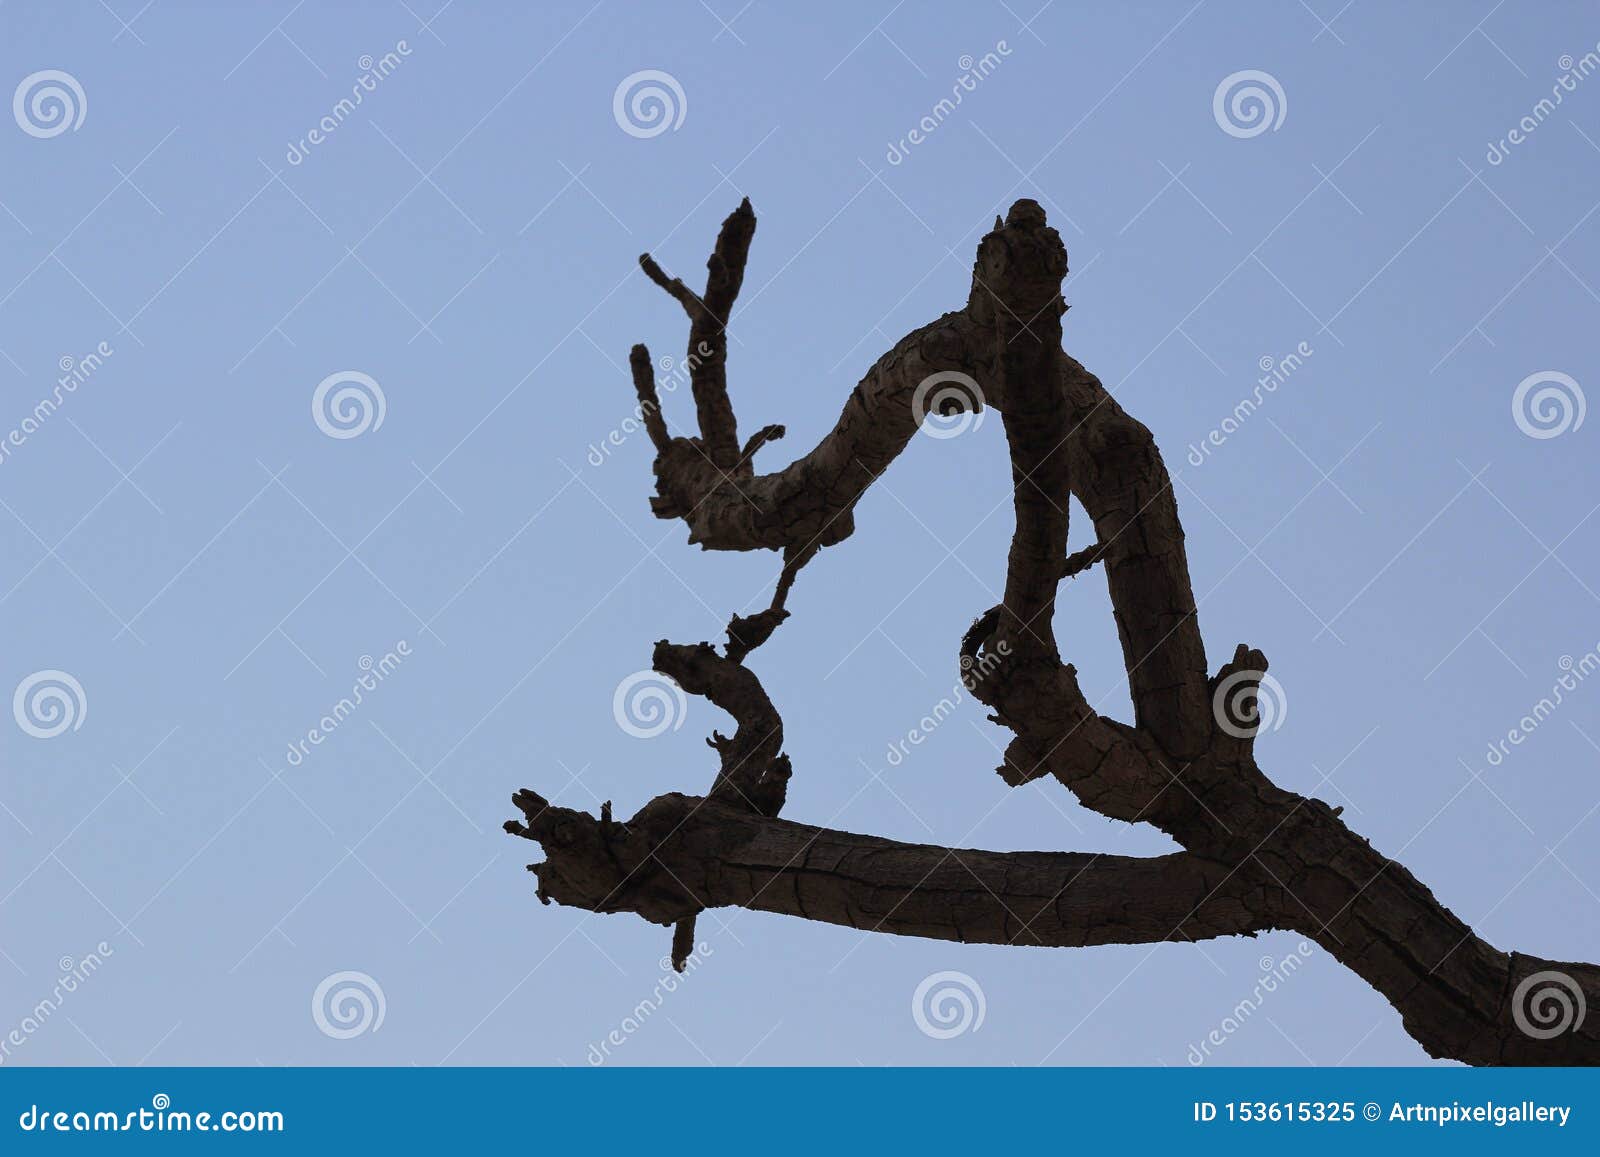 Old Arabian Tree Branches Silhouette Sky Backdrop Artistic Frame Stock